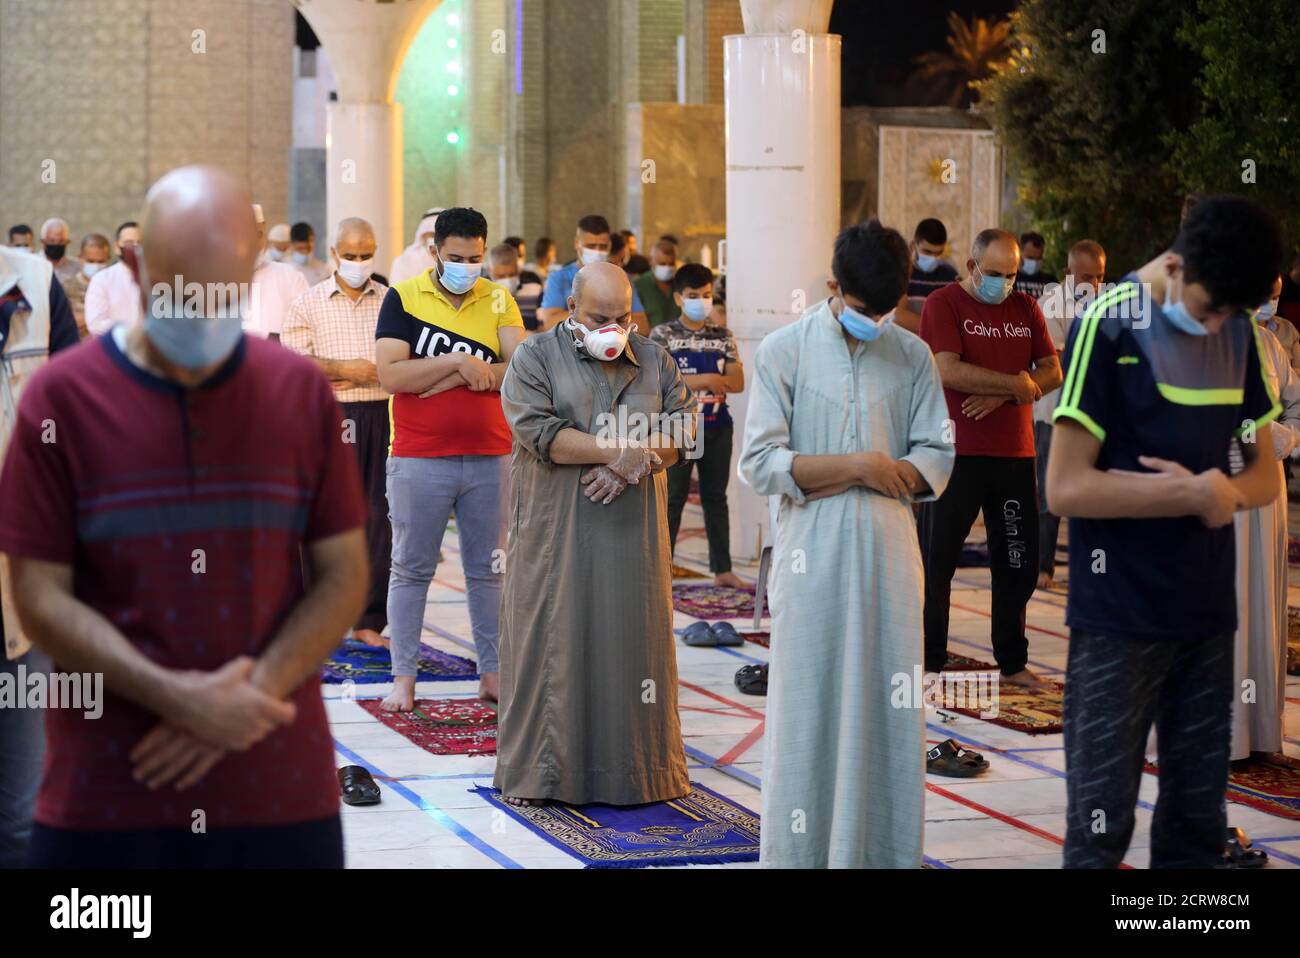 Baghdad. 20th Sep, 2020. People offer prayers at a mosque in Baghdad, Iraq on Sept. 20, 2020. The Iraqi Higher Committee for Health and National Safety decided on Saturday to reopen mosques and amusement parks on condition that health prevention measures are strictly followed and social distancing rules maintained. Credit: Xinhua/Alamy Live News Stock Photo